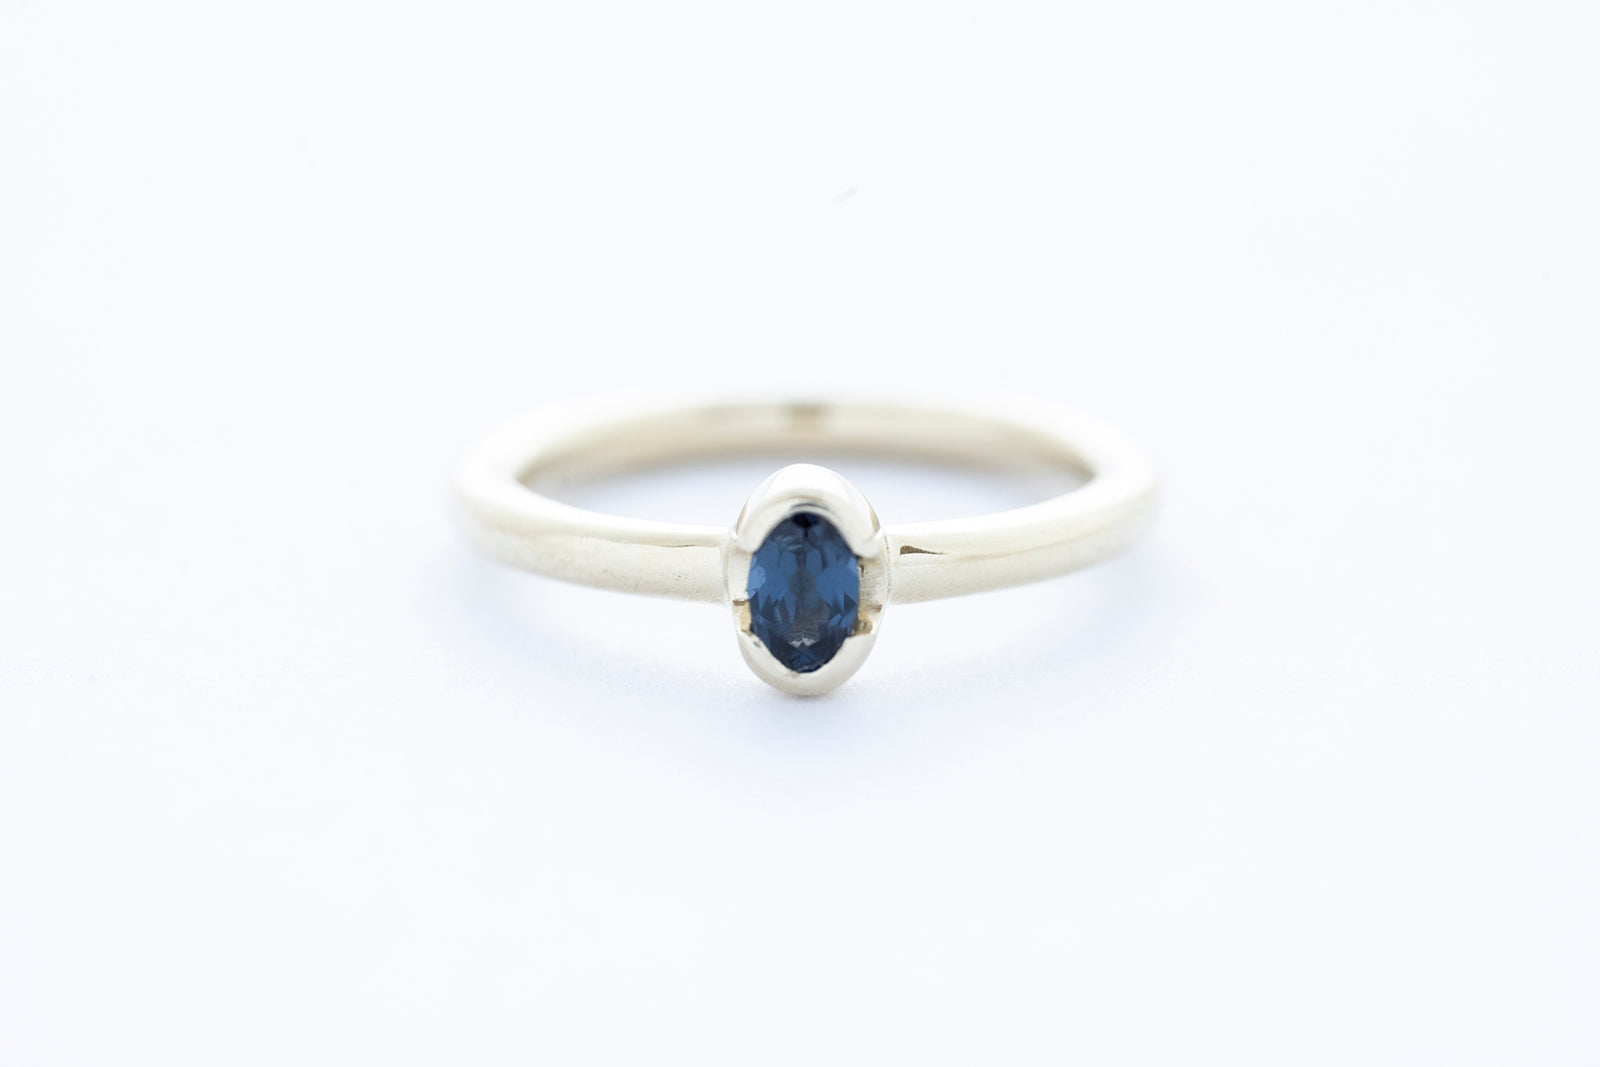 ELLIPSE ring - 14K yellow gold w. cobalt blue spinel stone